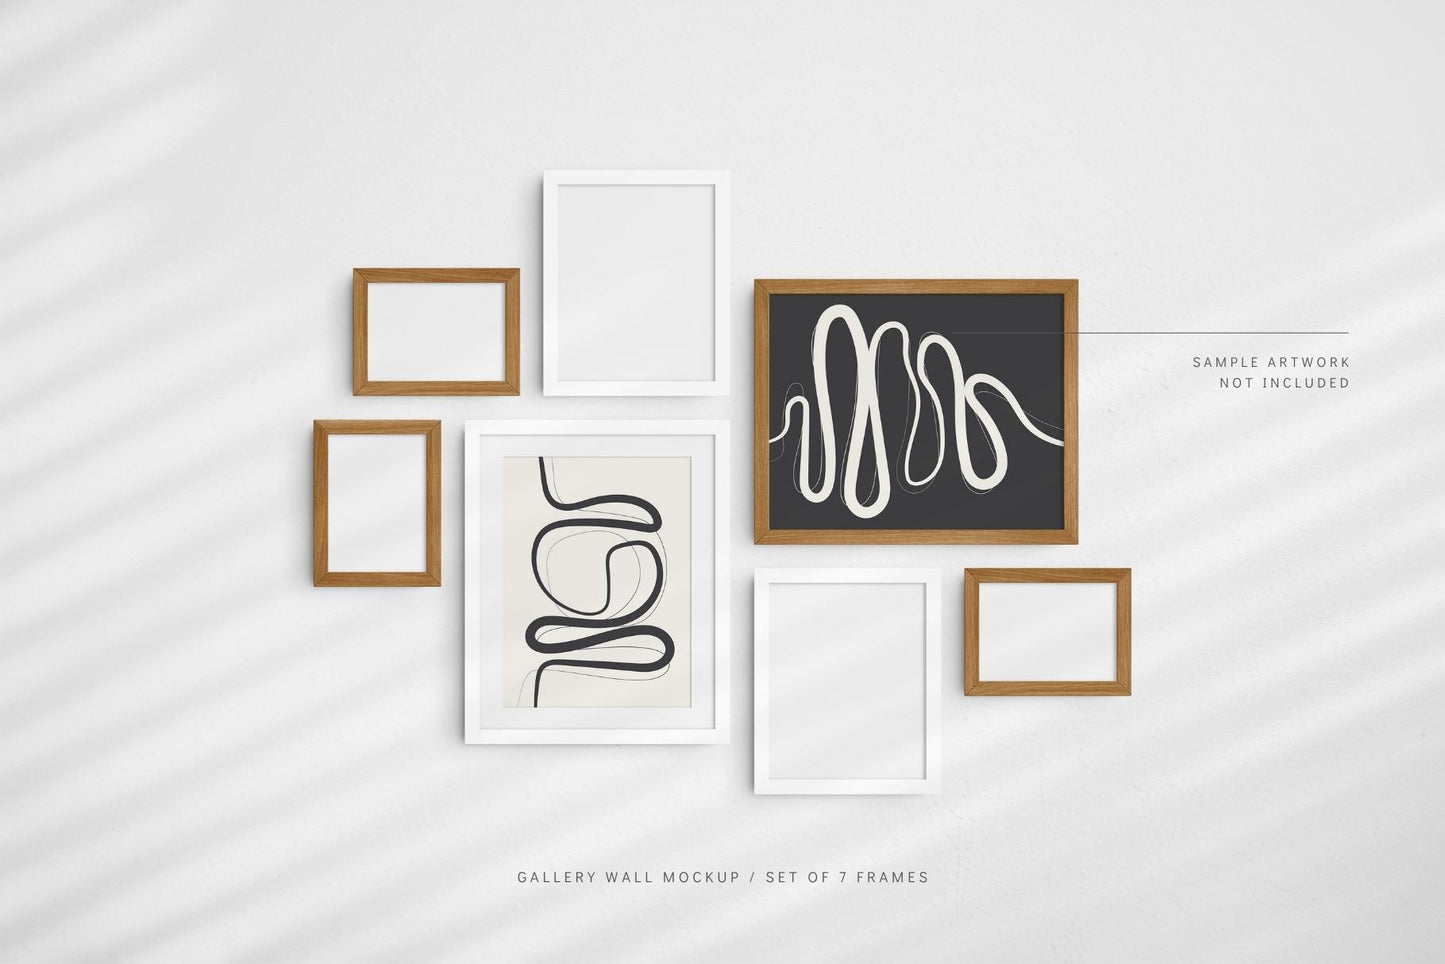 Gallery Wall Mockup | Set of 7 Frames | Frame Mockup | PSD | Editable Frame Colors and Texture